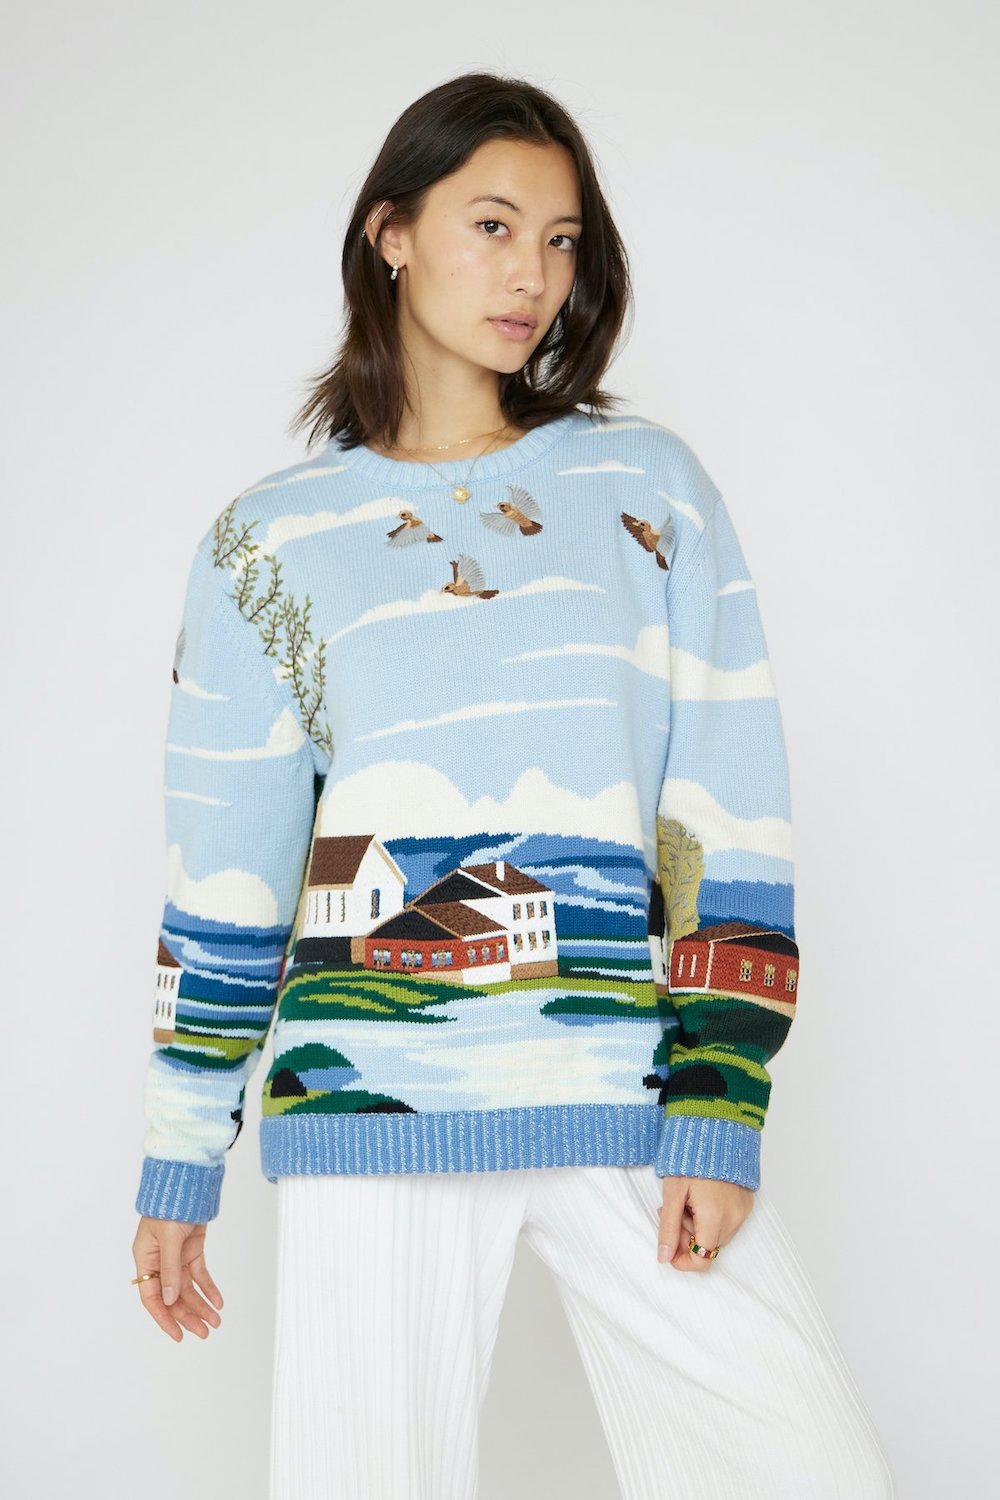 Spring Revival Embroidery Knit Jumper